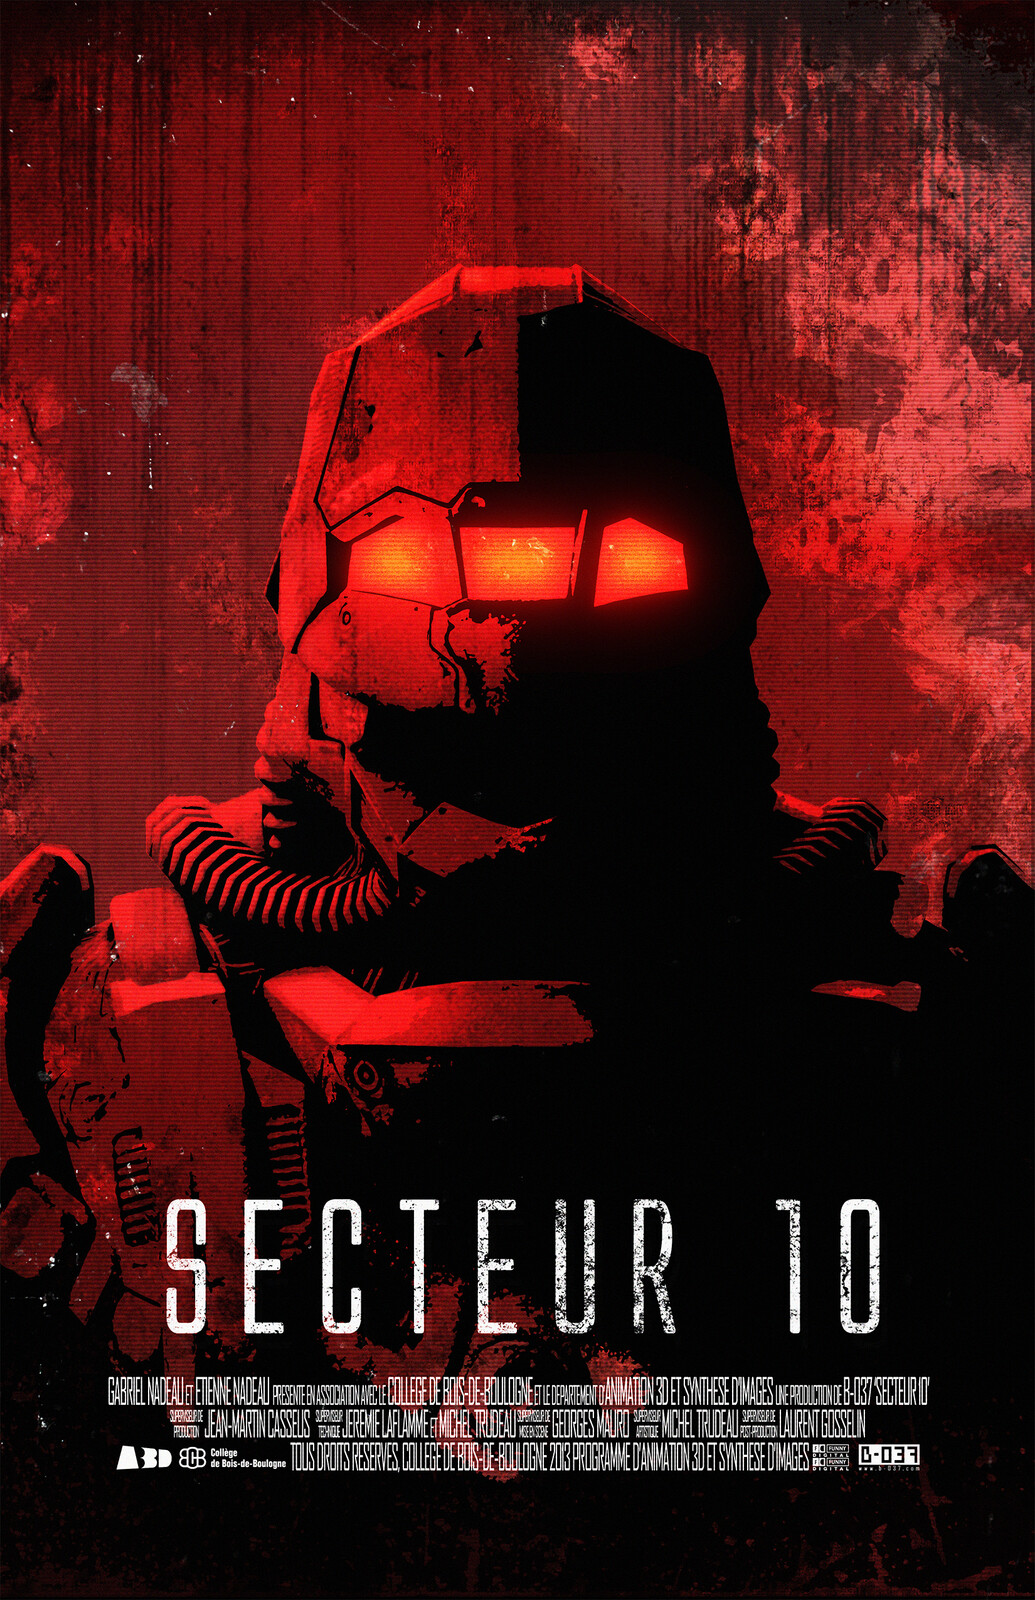 Poster created for Secteur 10.